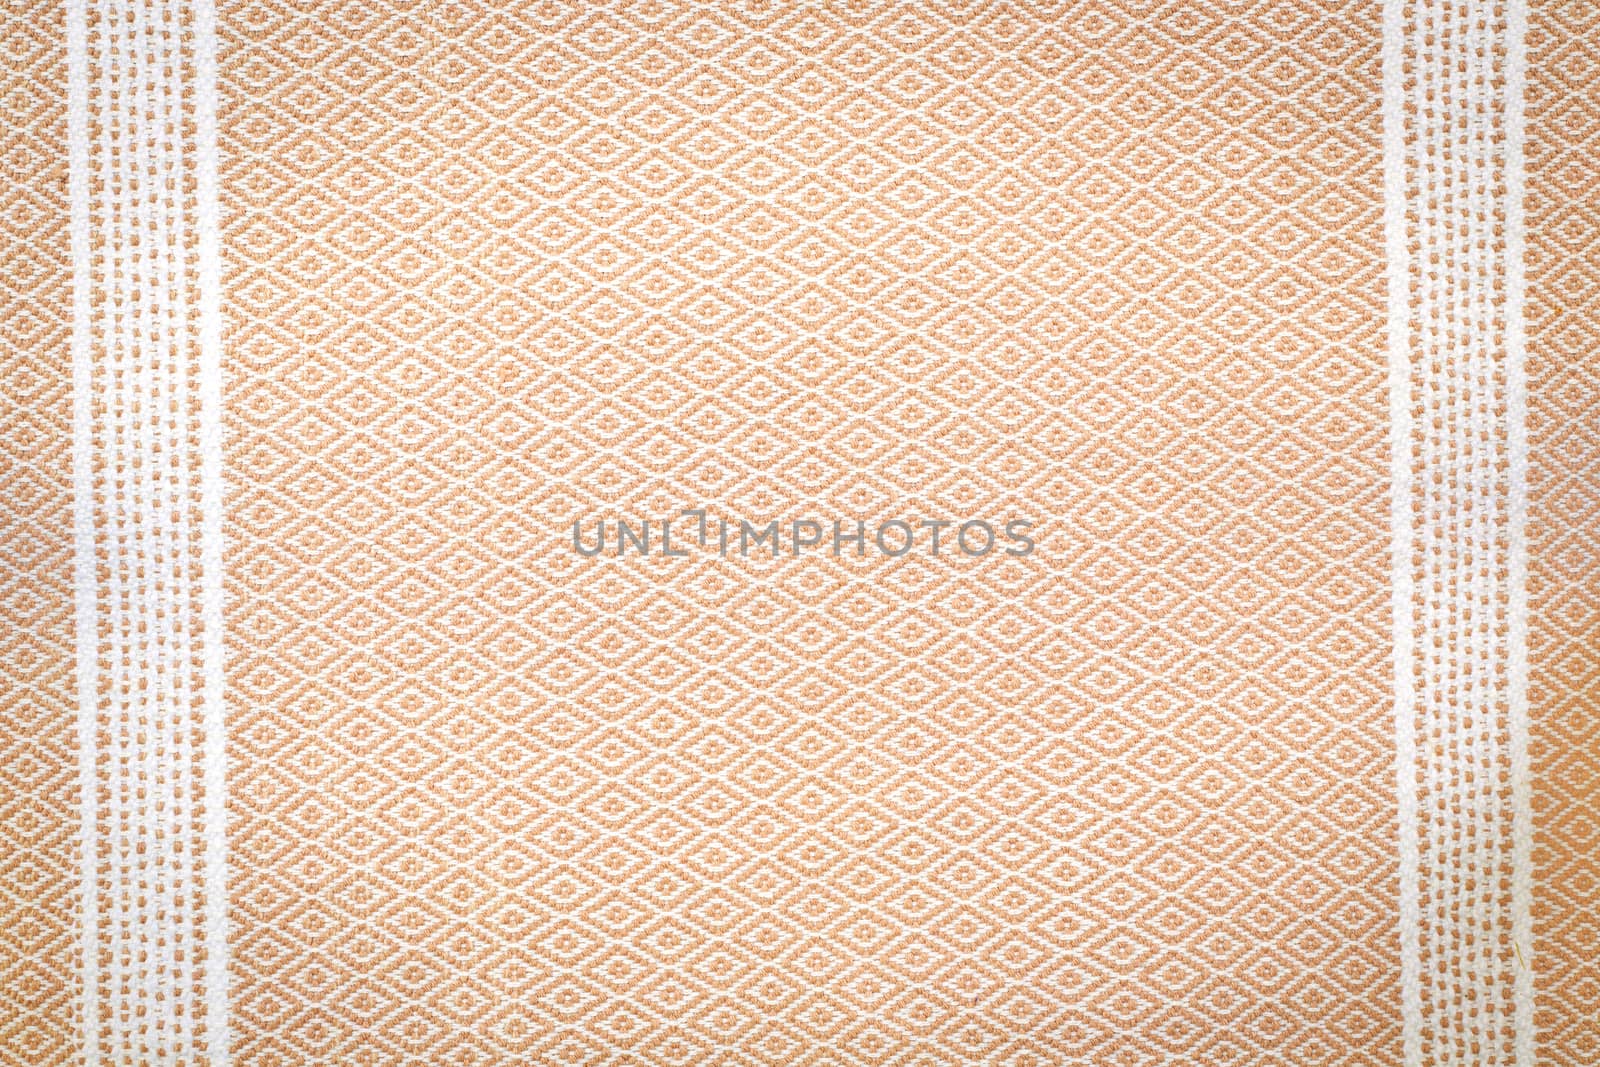 Brown lace fabric silk background texture.